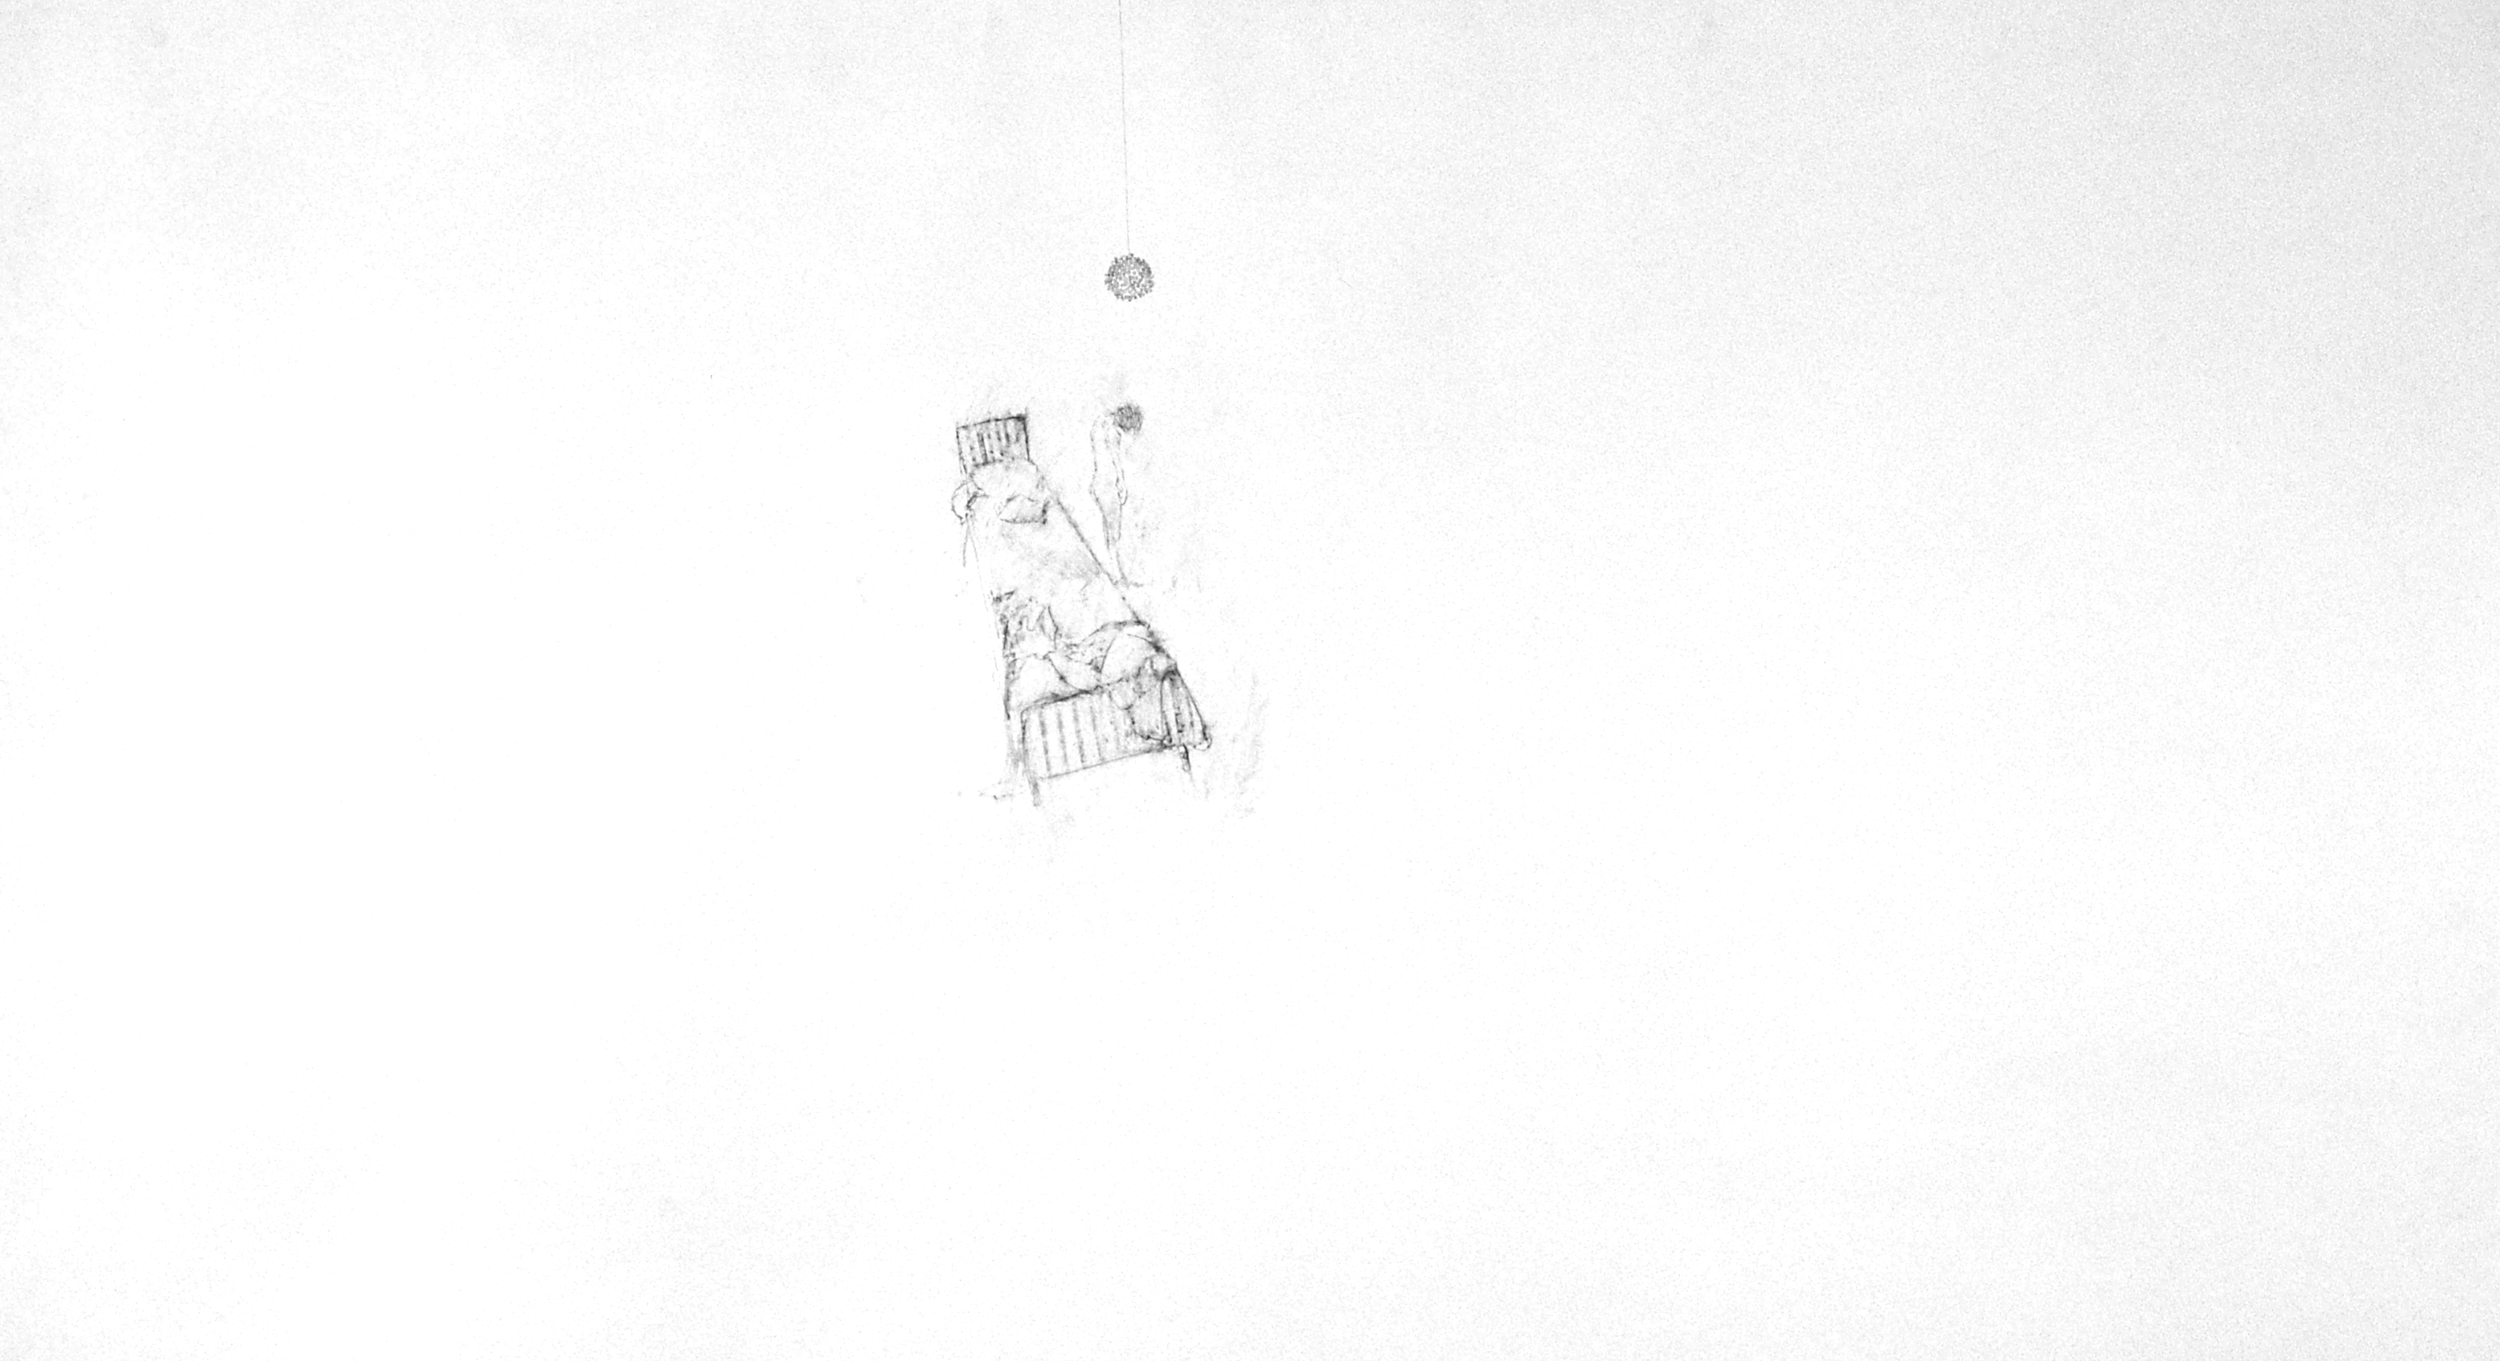   bed, boy and disco ball  | 2005 | 30" x 58" 